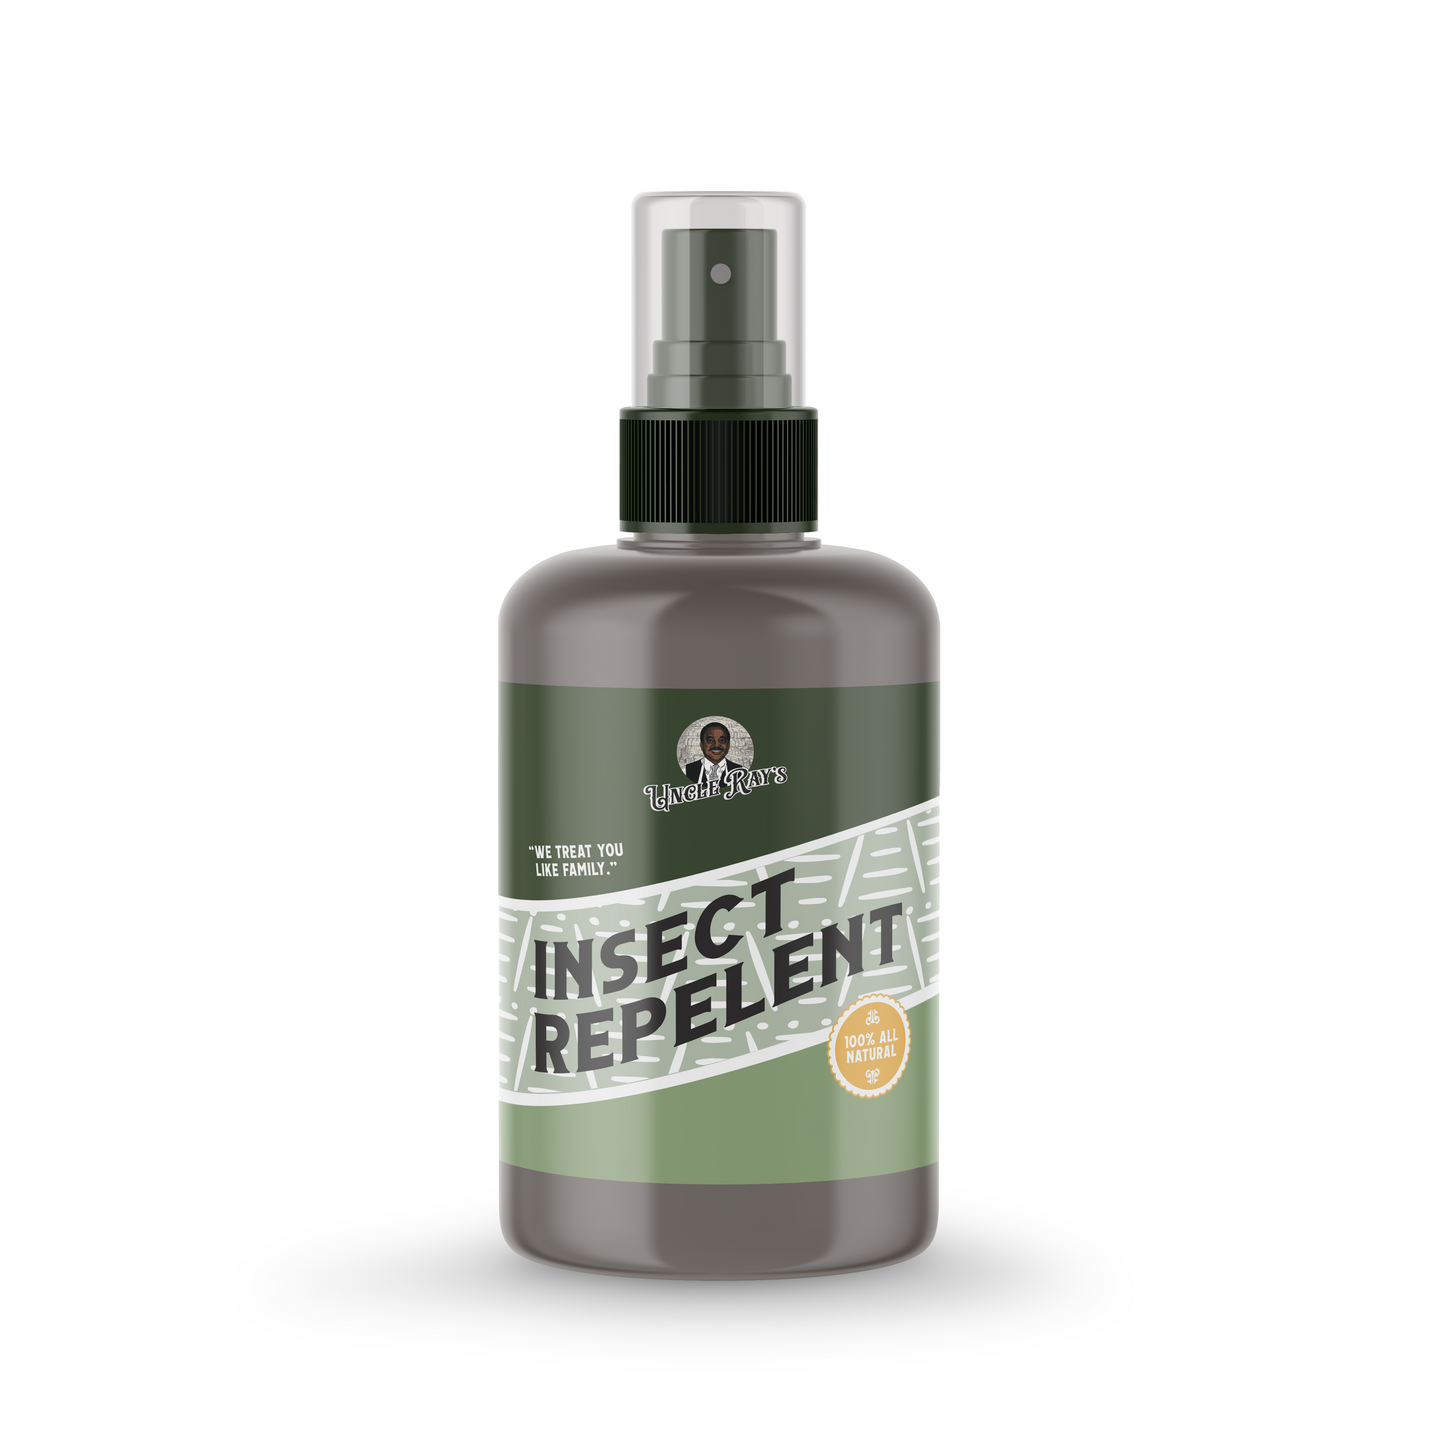 Insect Repelent